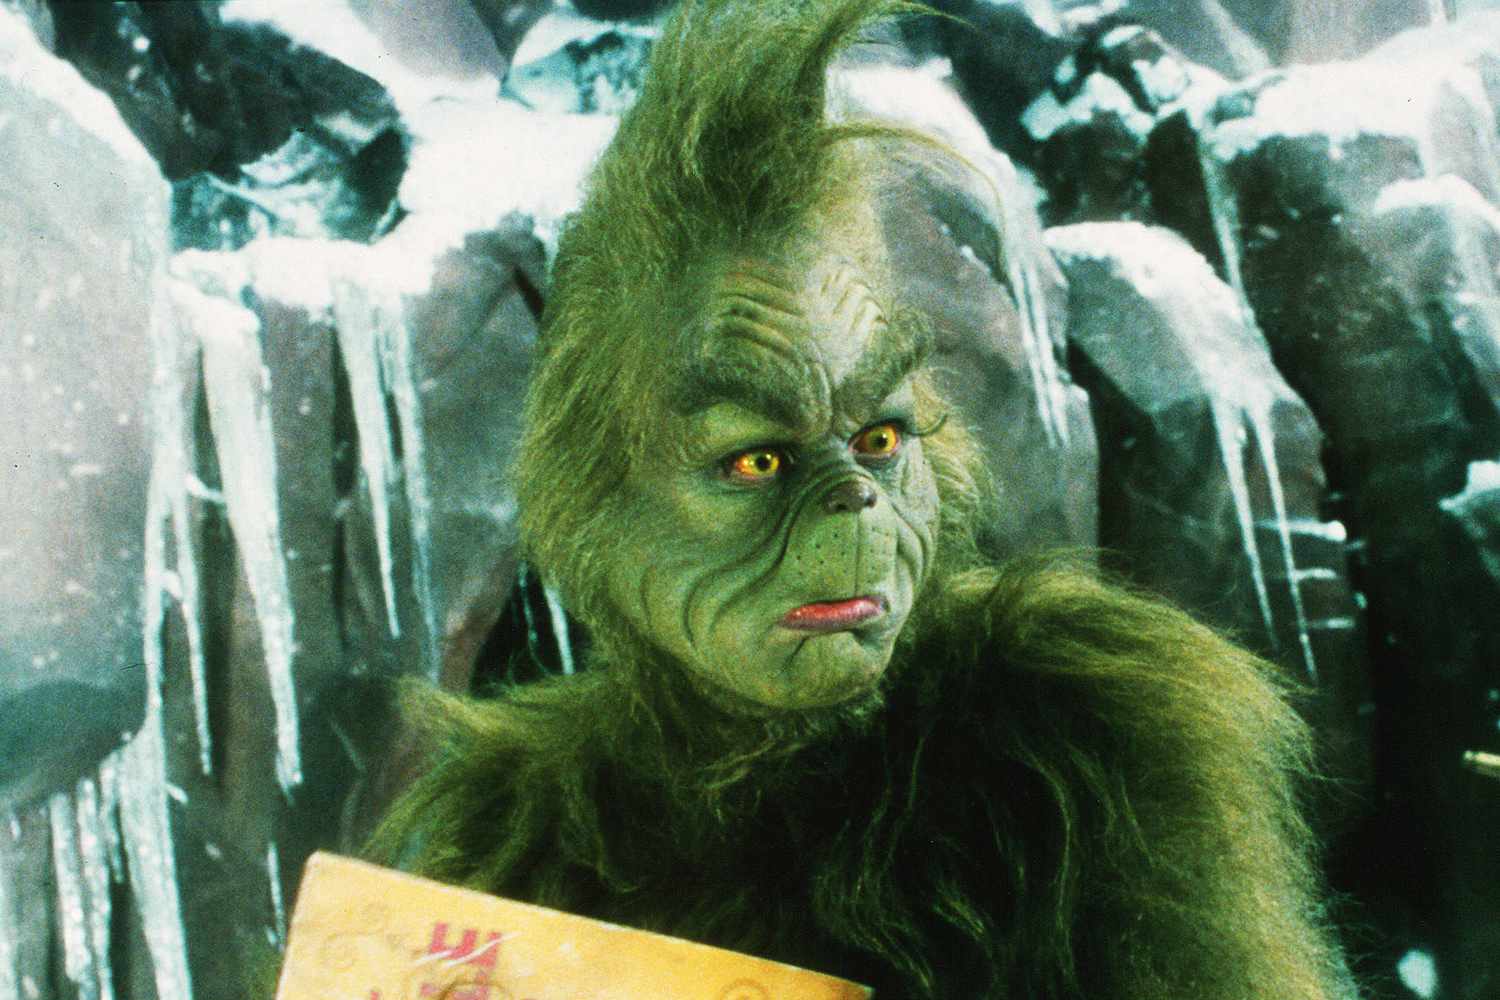 Jim Carrey as the Grinch in the live-action movie 